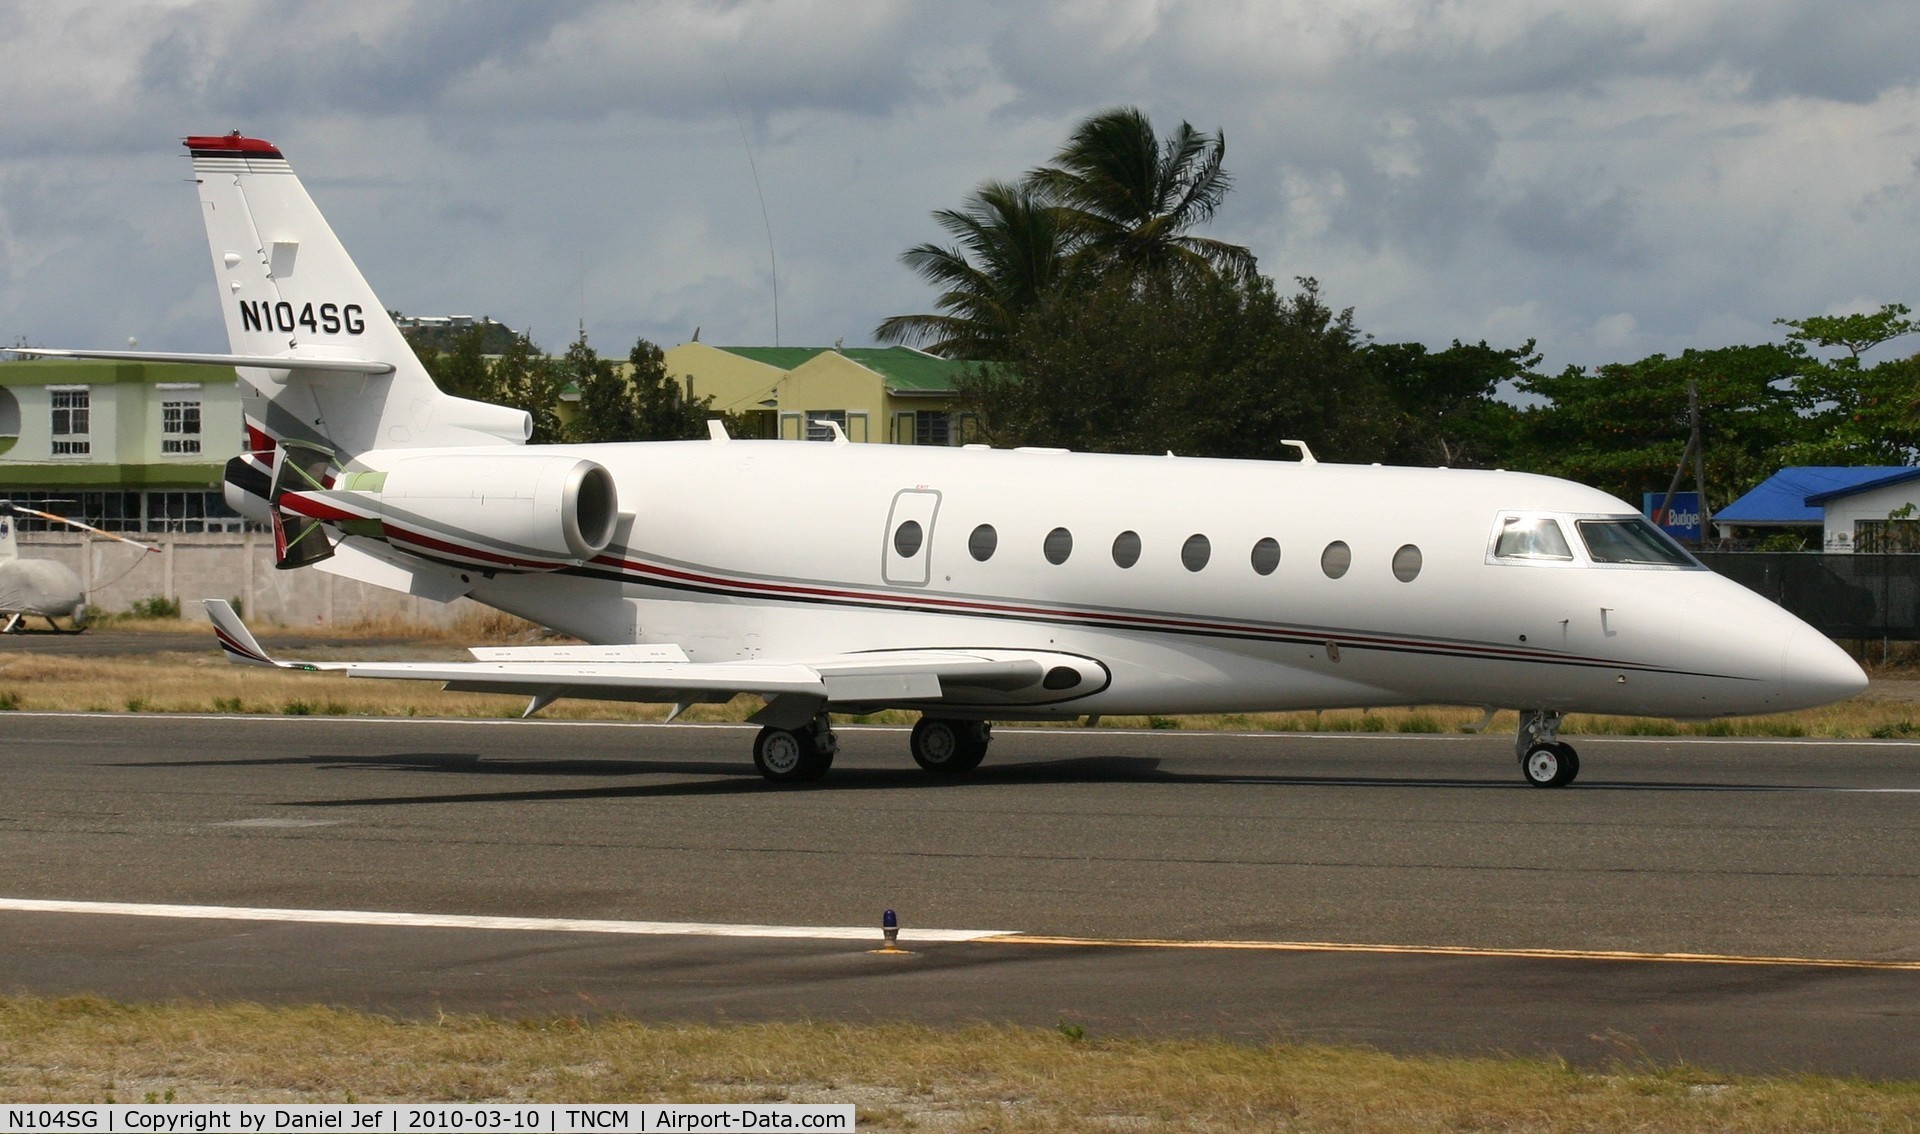 N104SG, Israel Aerospace Industries Gulfstream 200 C/N 212, Making use of there stopping power after landing at TNCM